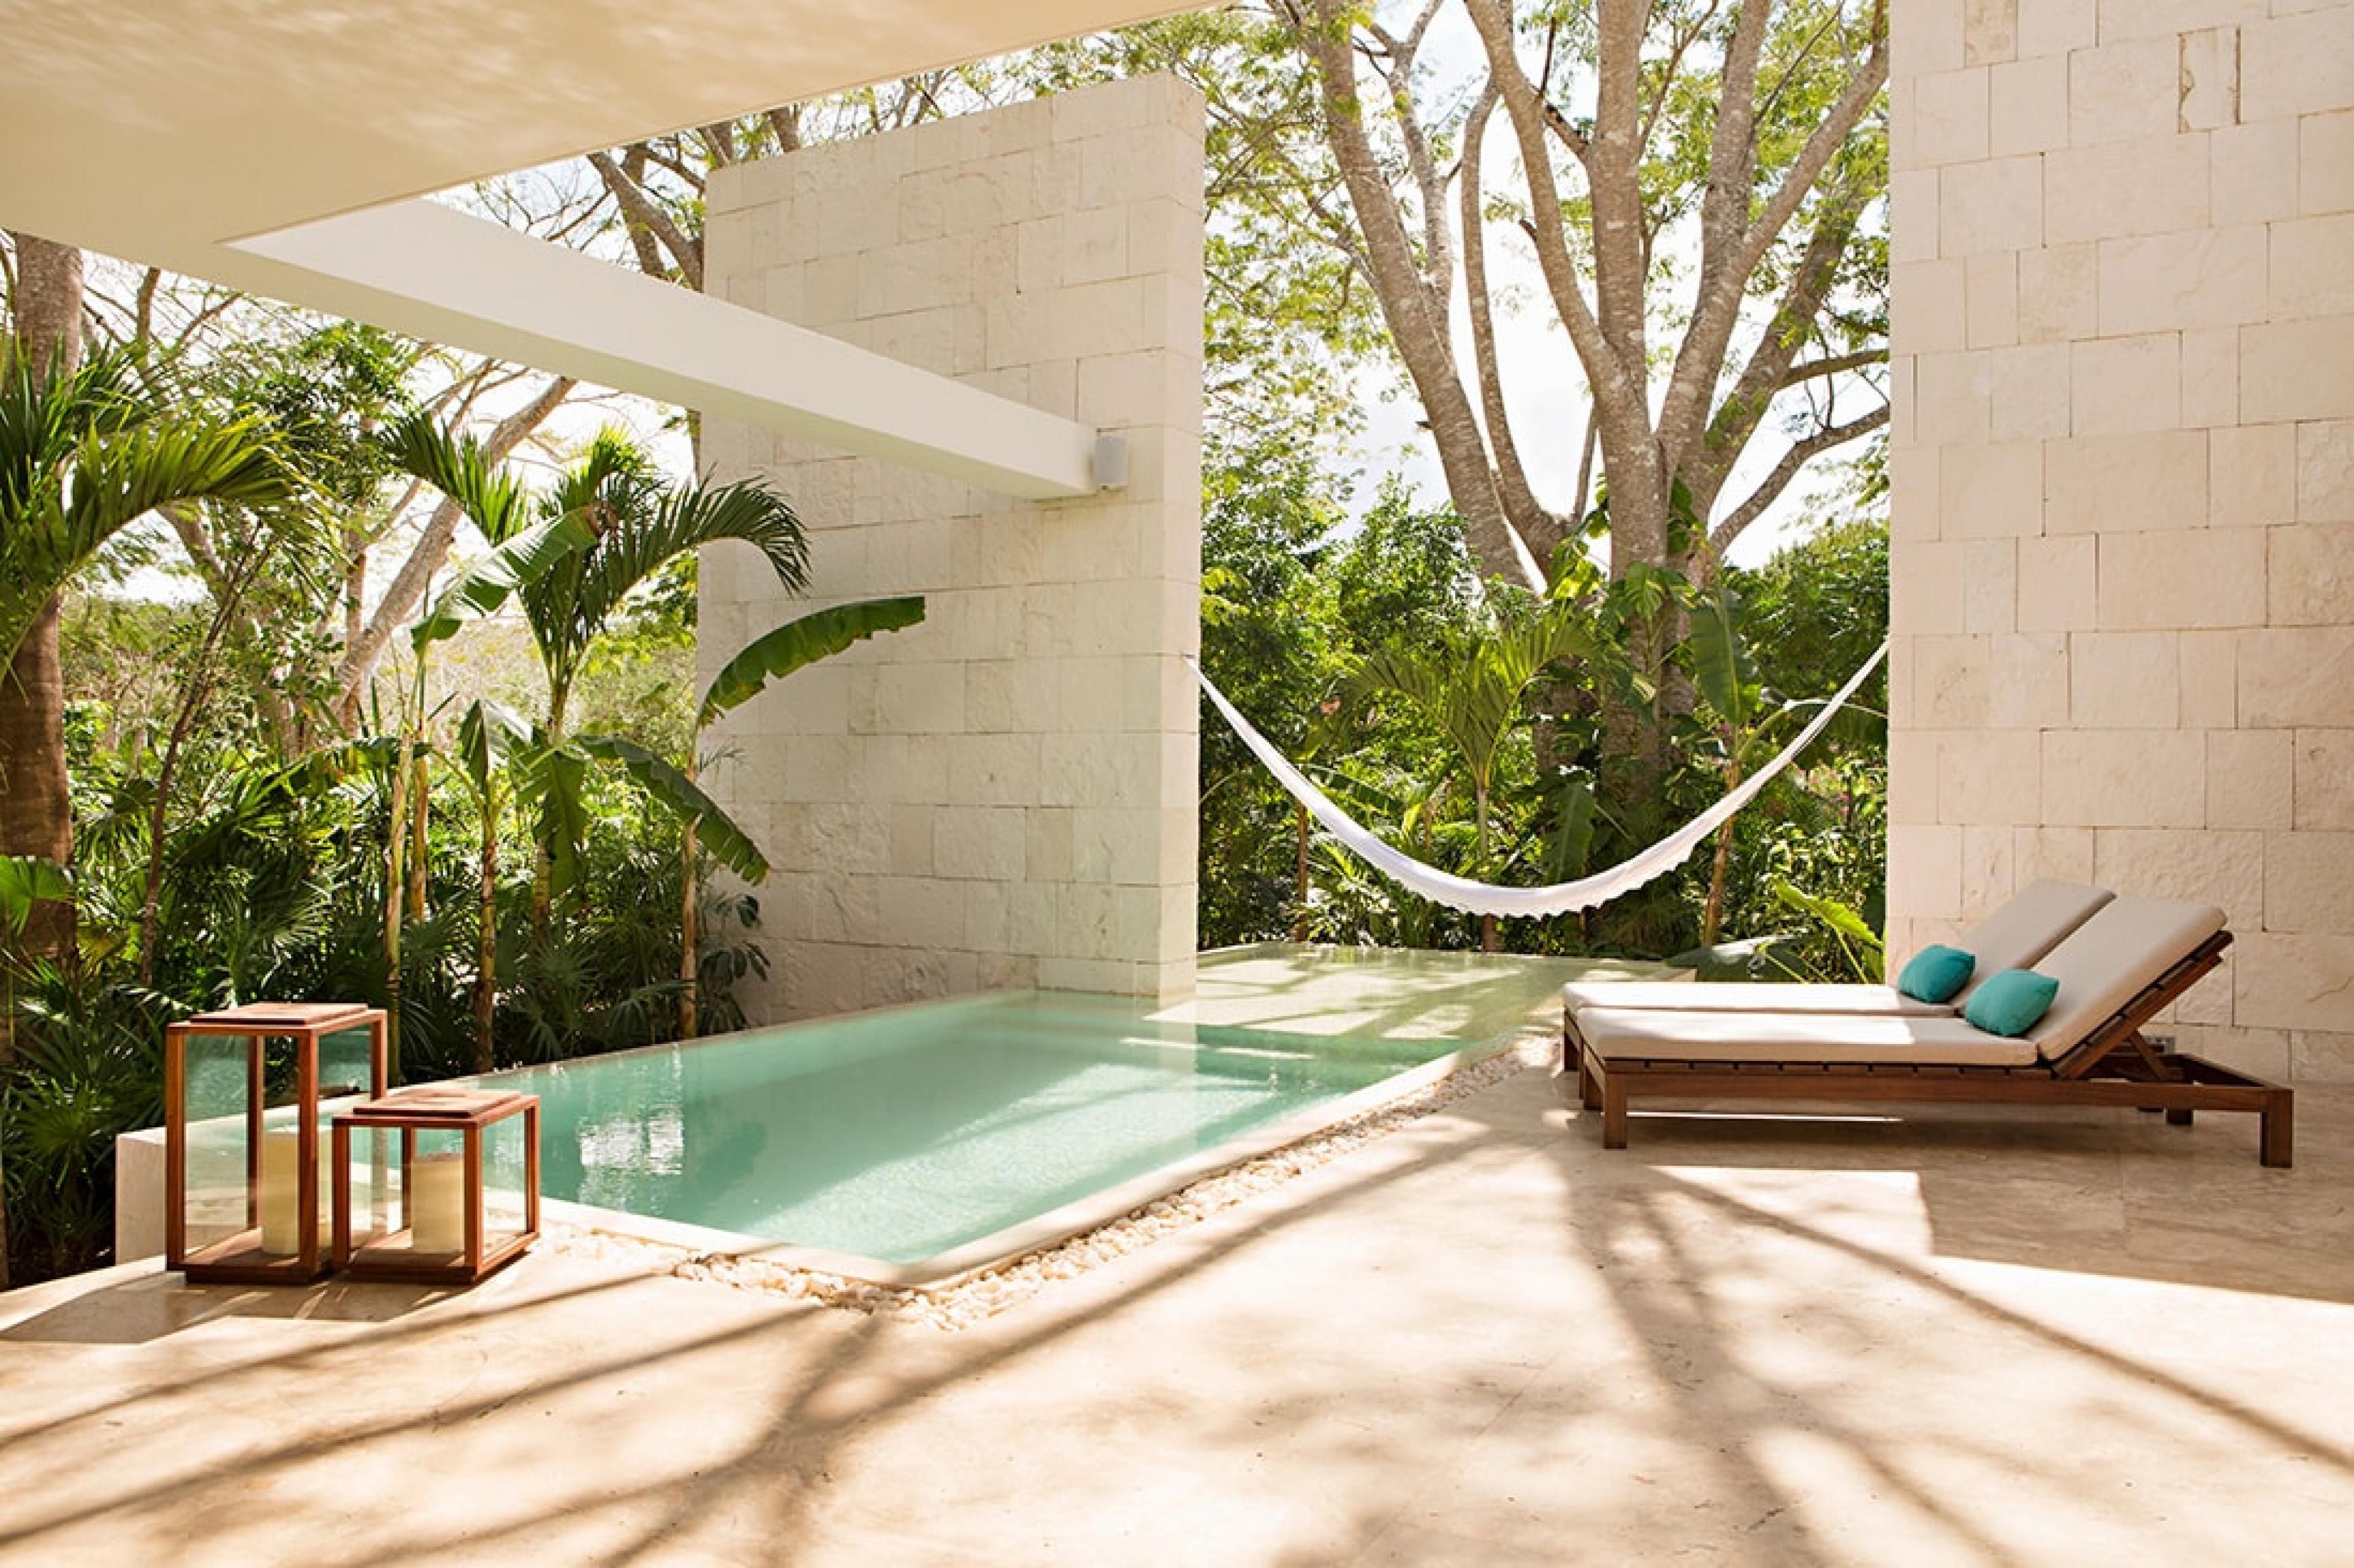 private villa's patio with plunge pool and hammock hanging in front of garden area